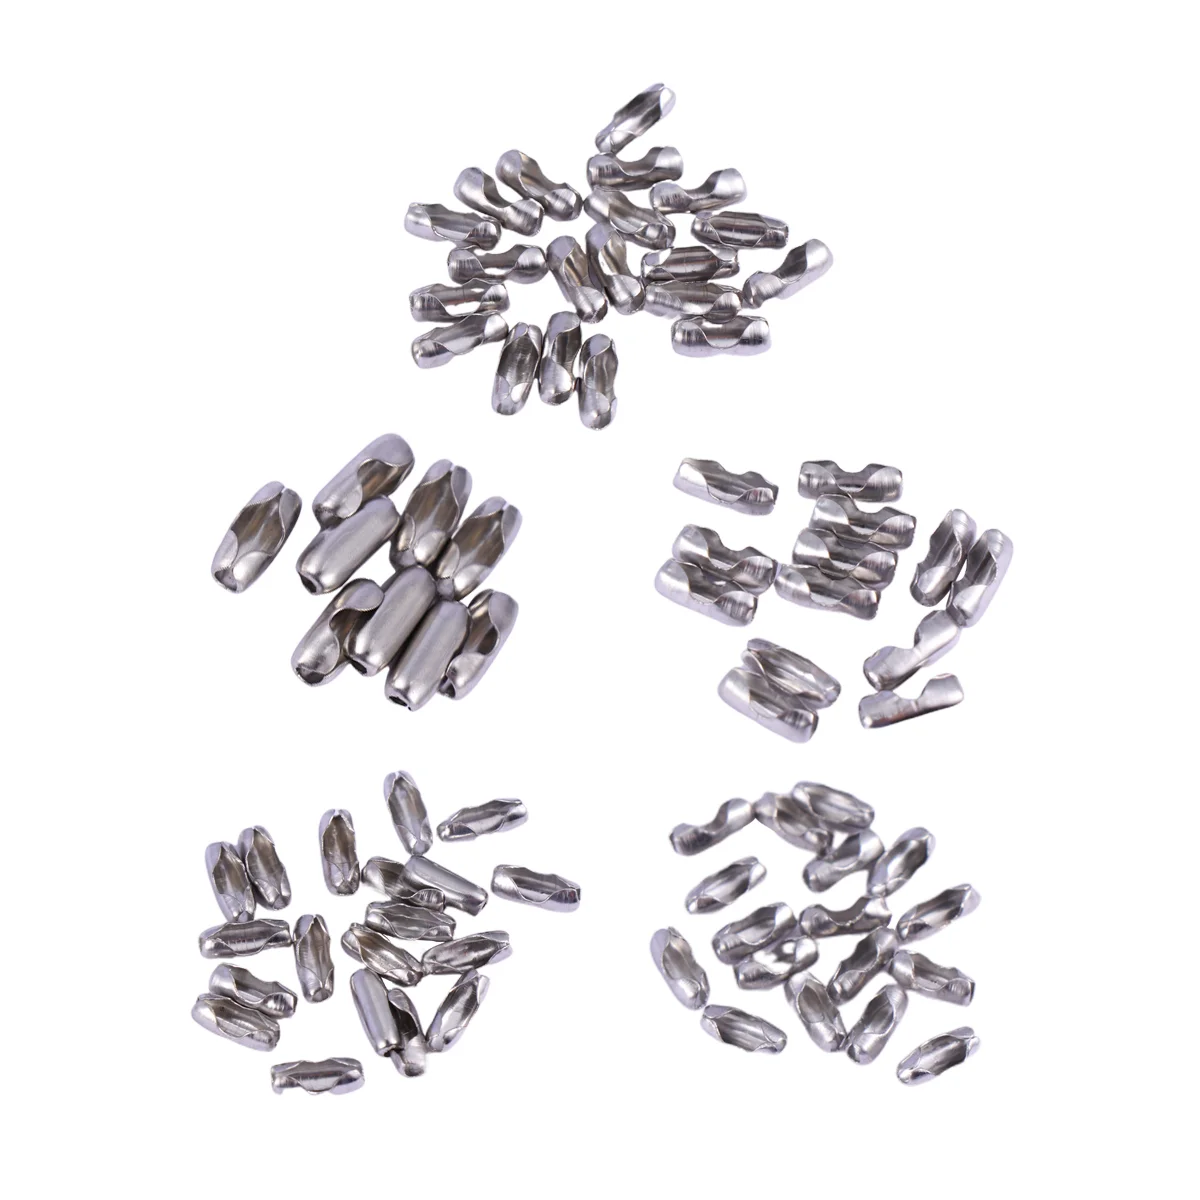 

100pcs Stainless Steel Bead Chain Connector Ball Chain Connector Clasps DIY Jewelry Accessories (15mm+2mm+24mm+30mm+40mm)